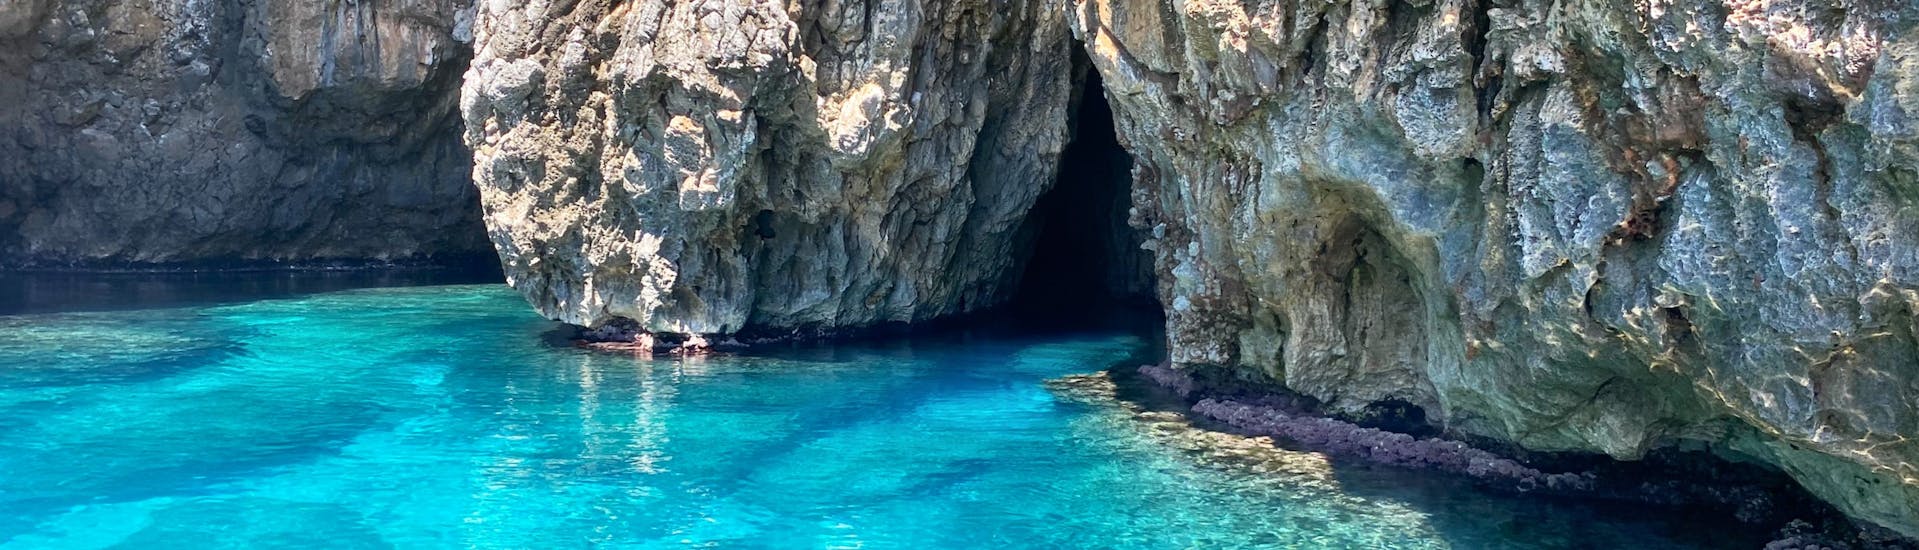 Boat Trip to the Caves of Santa Maria di Leuca with Snorkeling and Apéritif.